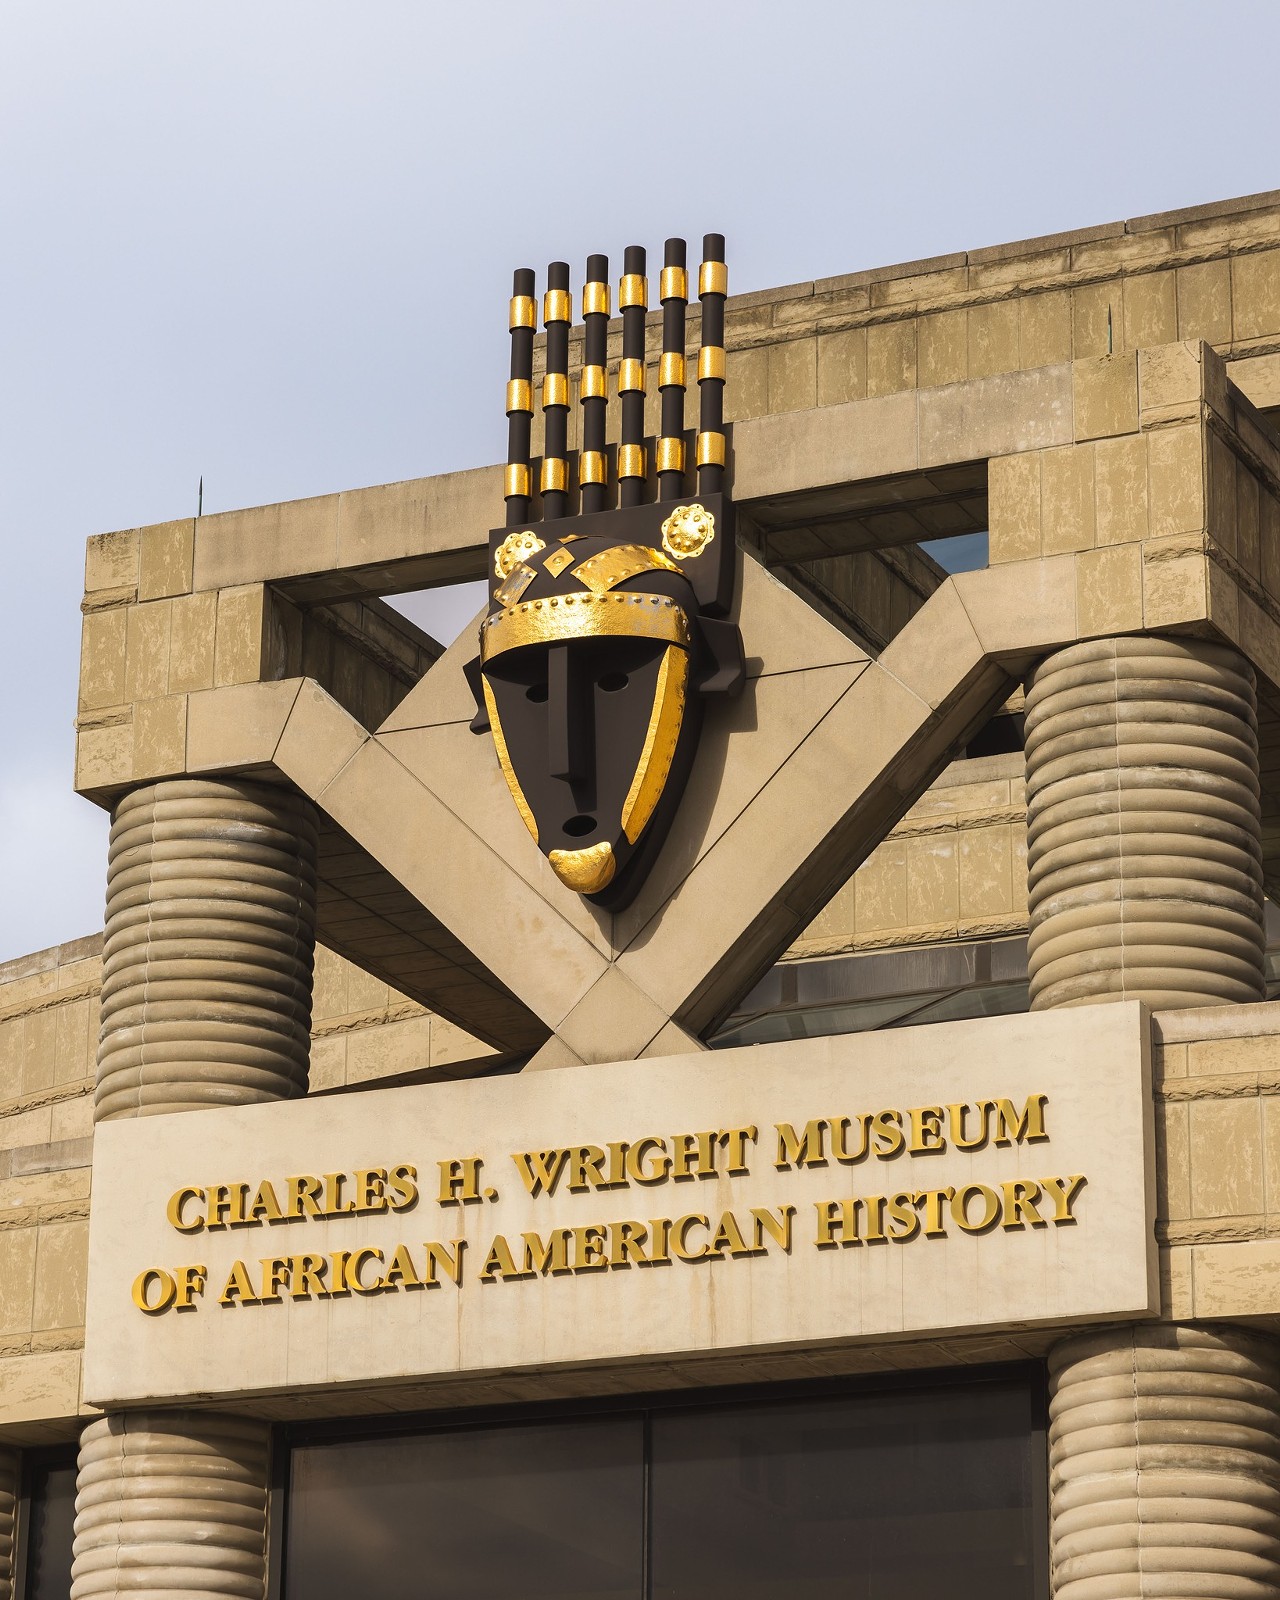 Charles H. Wright Museum